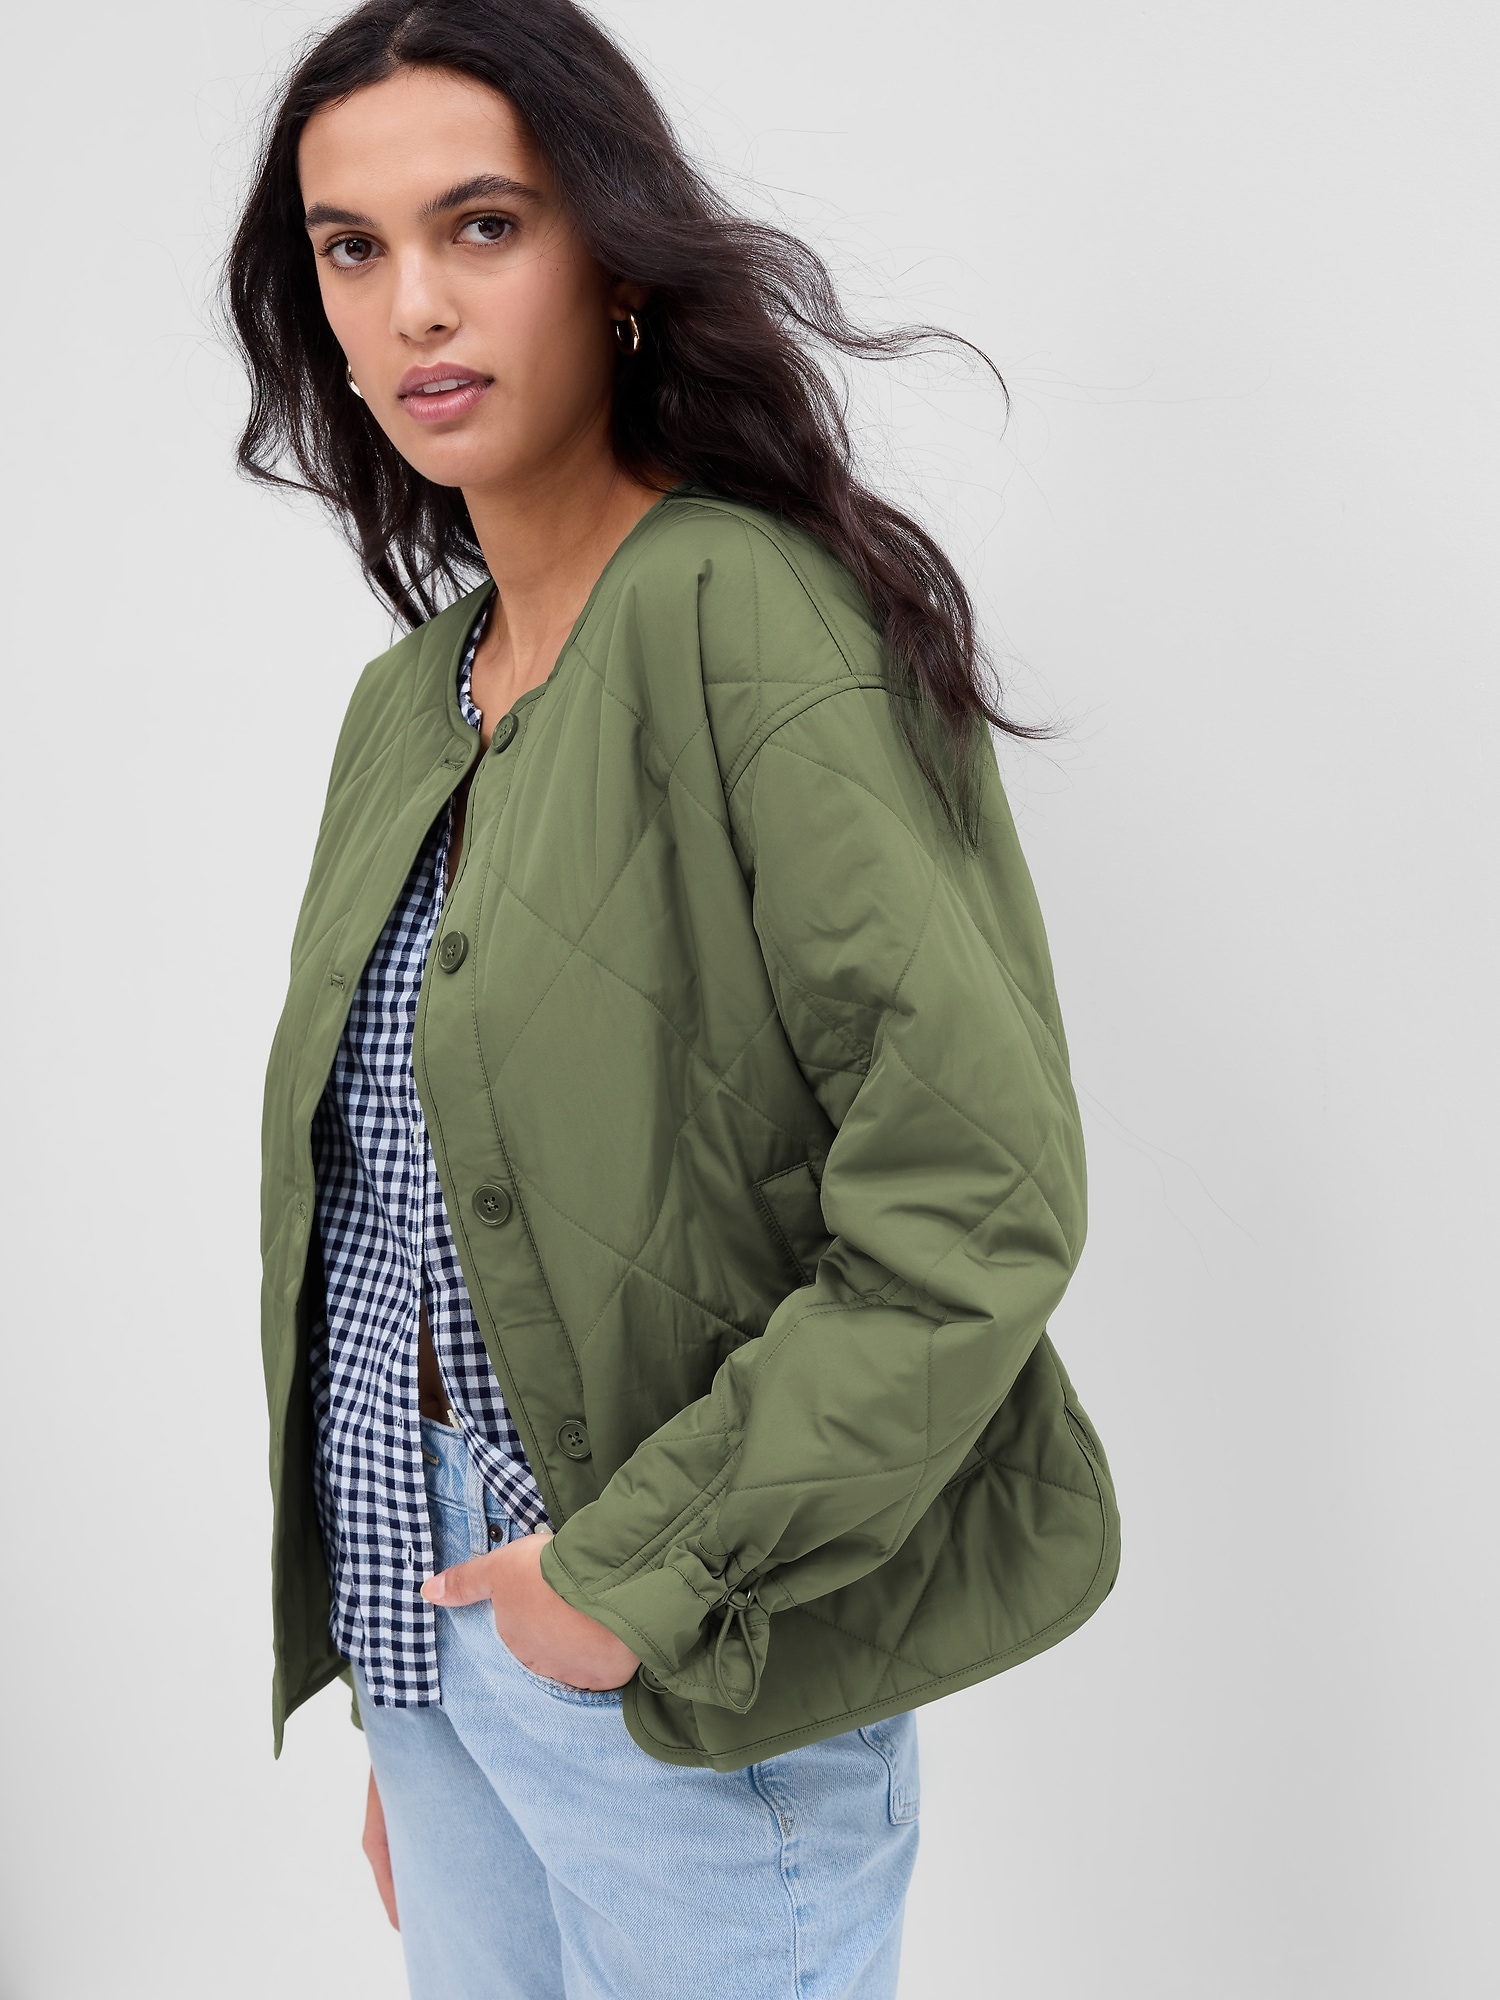 old navy lightweight army green/olive green quilted jacket  Women  outerwear jacket, Lightweight quilted jacket, Quilted jacket